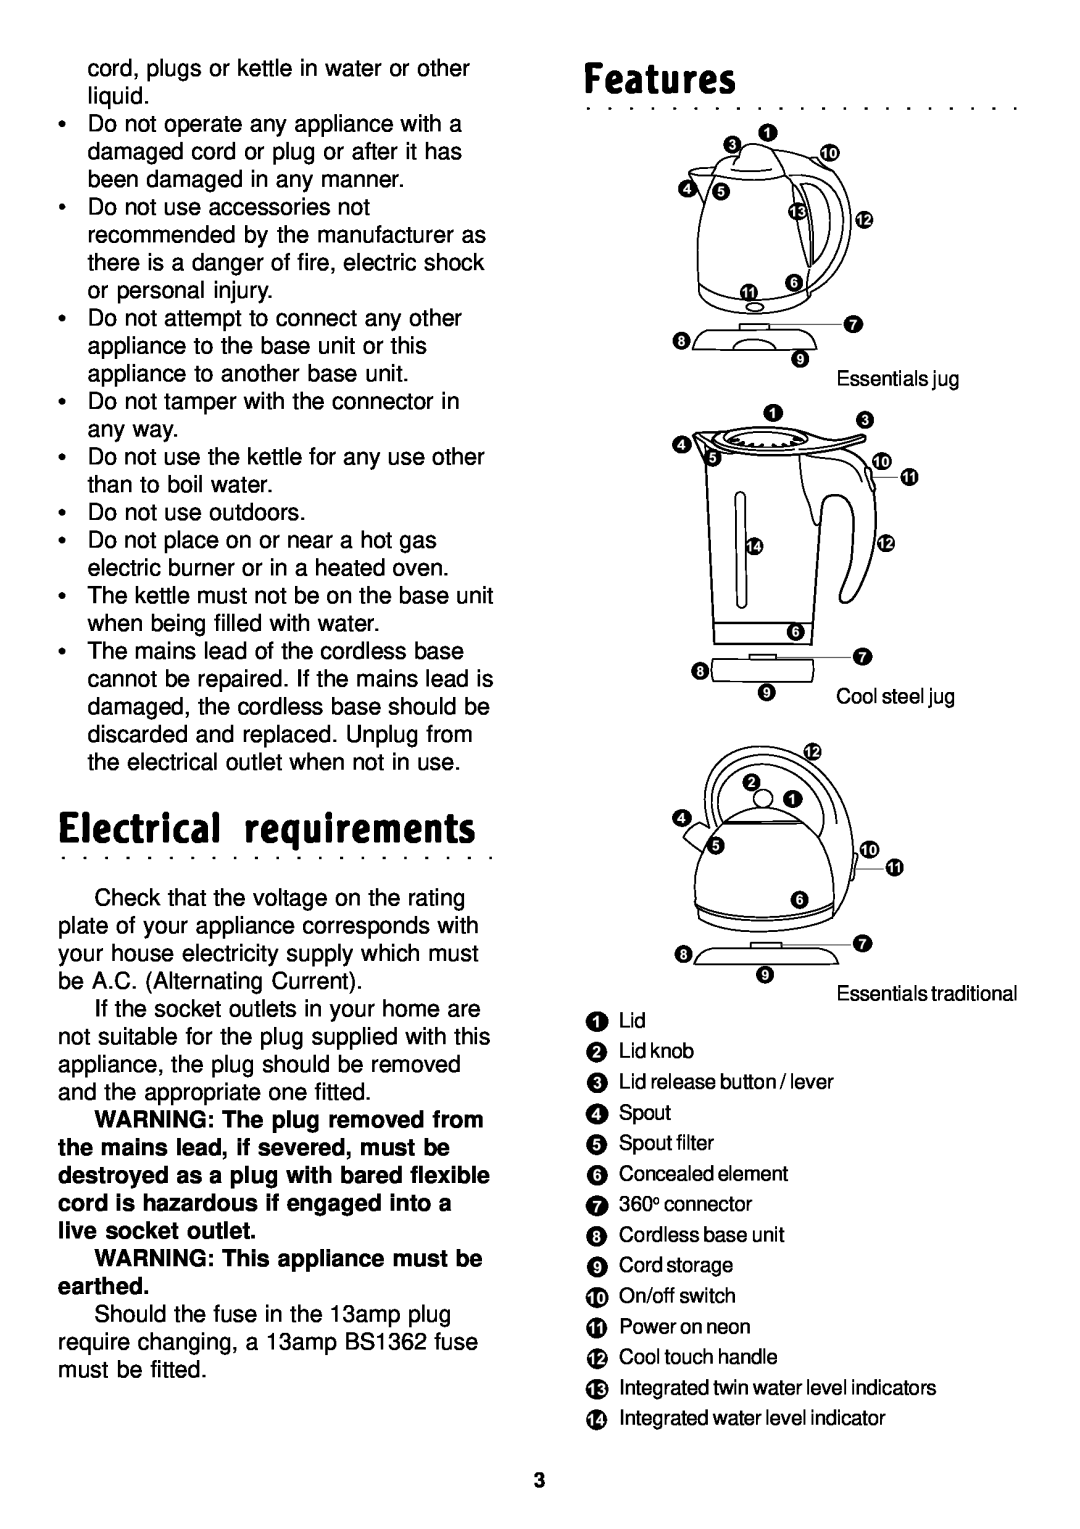 Morphy Richards Stainless steel kettle manual WARNING This appliance must be earthed, Electrical requirements, Features 